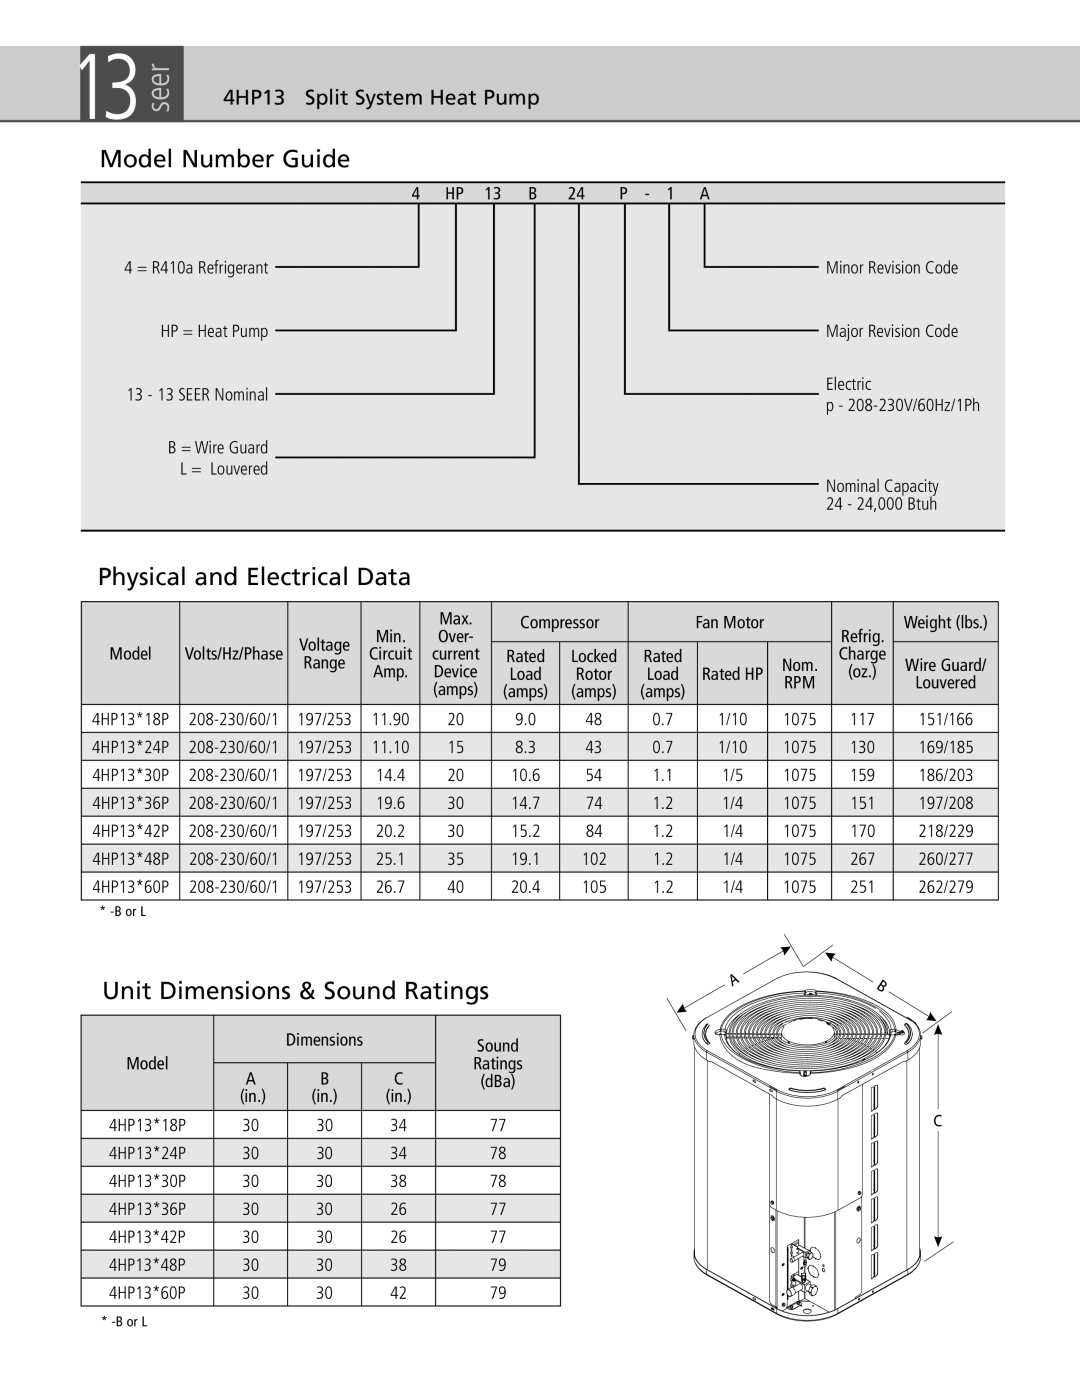 Ducane (HVAC) B, L, 4hp13 warranty Model Number Guide, Physical and Electrical Data, Unit Dimensions & Sound Ratings 